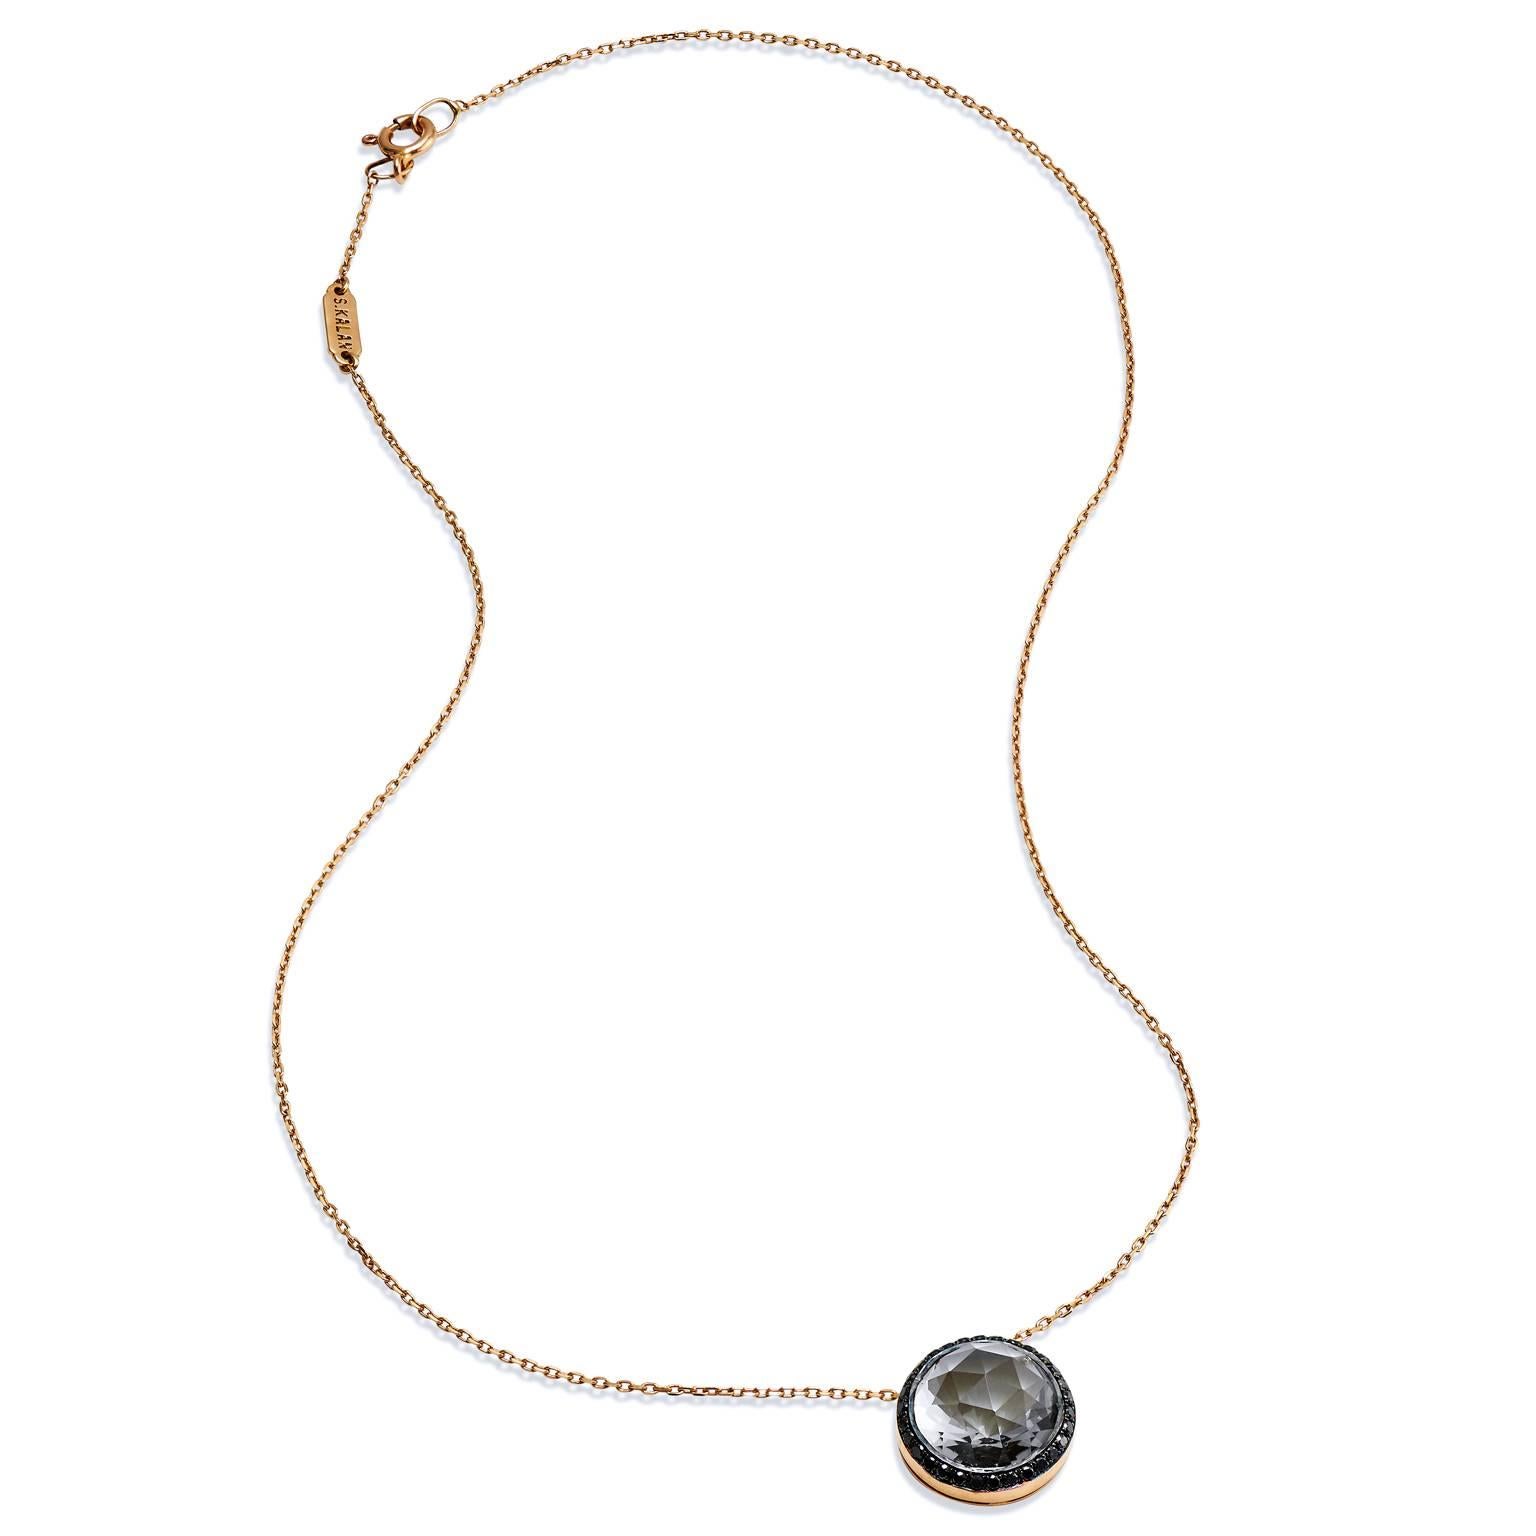 Suzanne Kalan 18 karat rose gold 16 inch necklace with a stunning 12 millimeter green amethyst and 0.35 carat of black diamonds pave set around pendant at center. 

